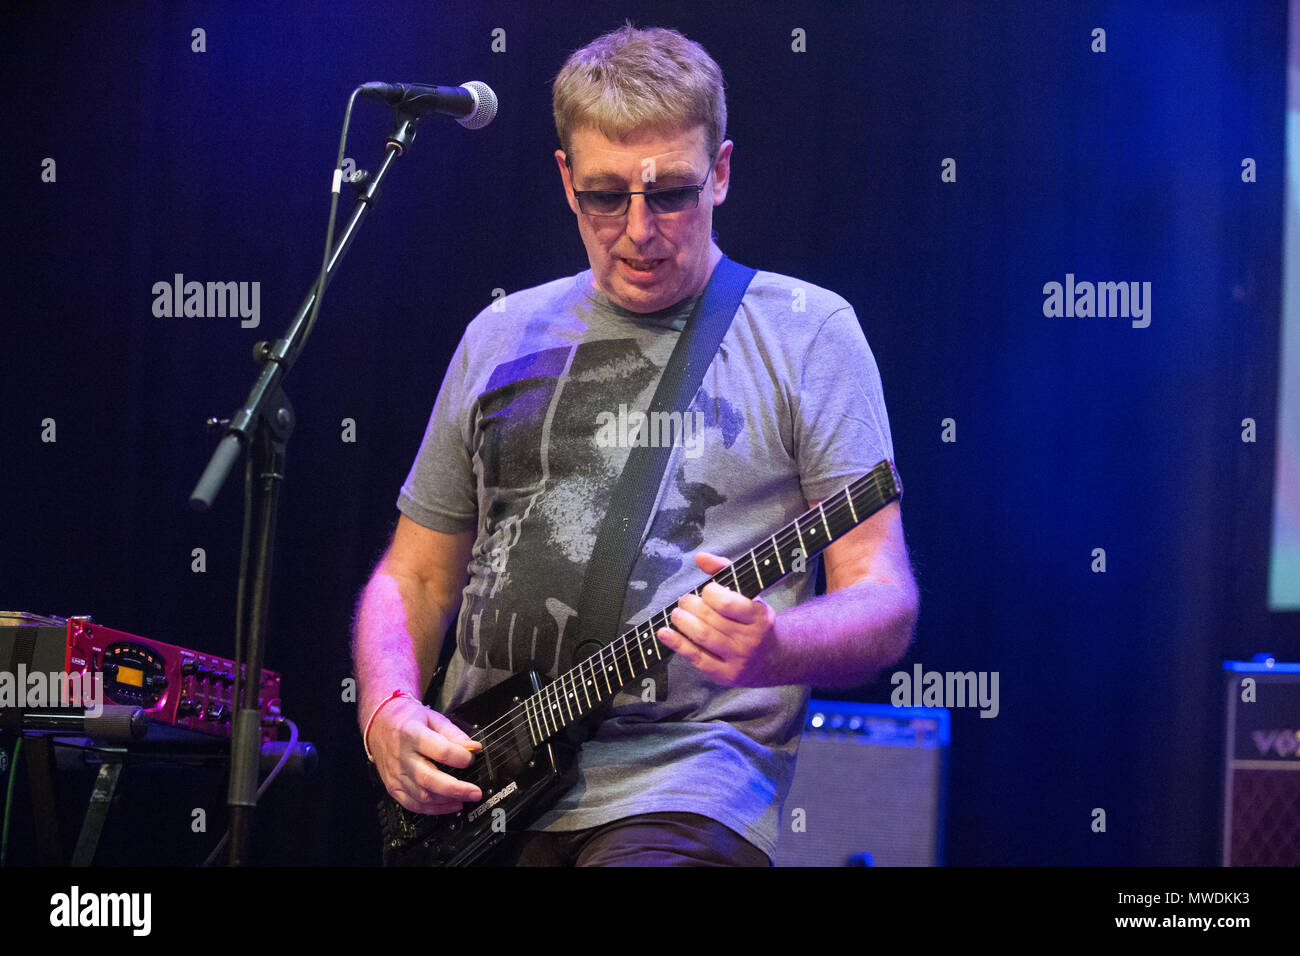 Norway, Oslo - May 31, 2018. The international progressive rock band Gong  performs a live concert at Cosmopolite in Oslo. Here guitarist Steve  Hillage is seen live on stage. (Photo credit: Gonzales